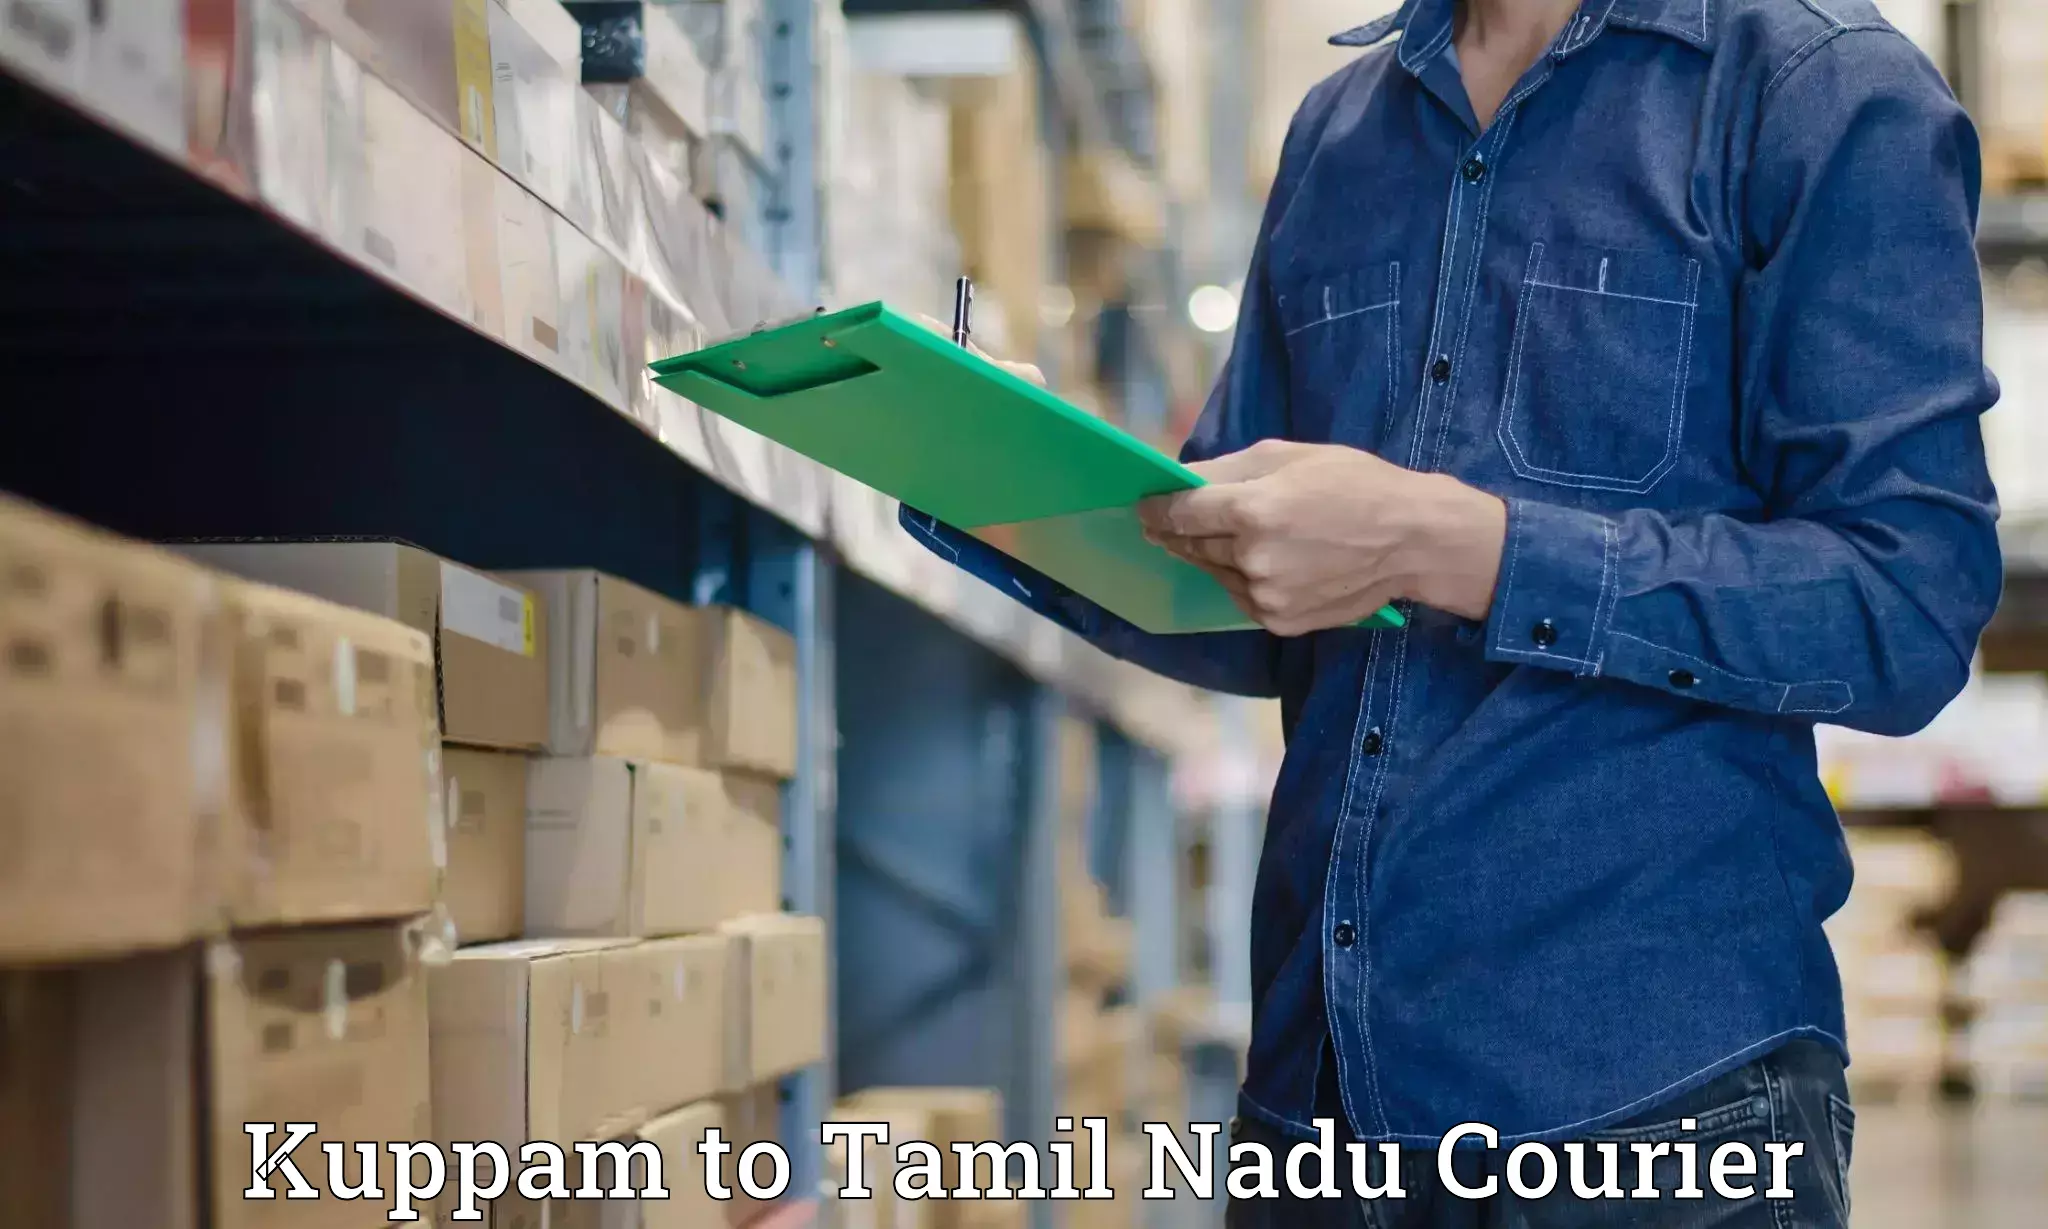 Specialized courier services Kuppam to Chennai Port